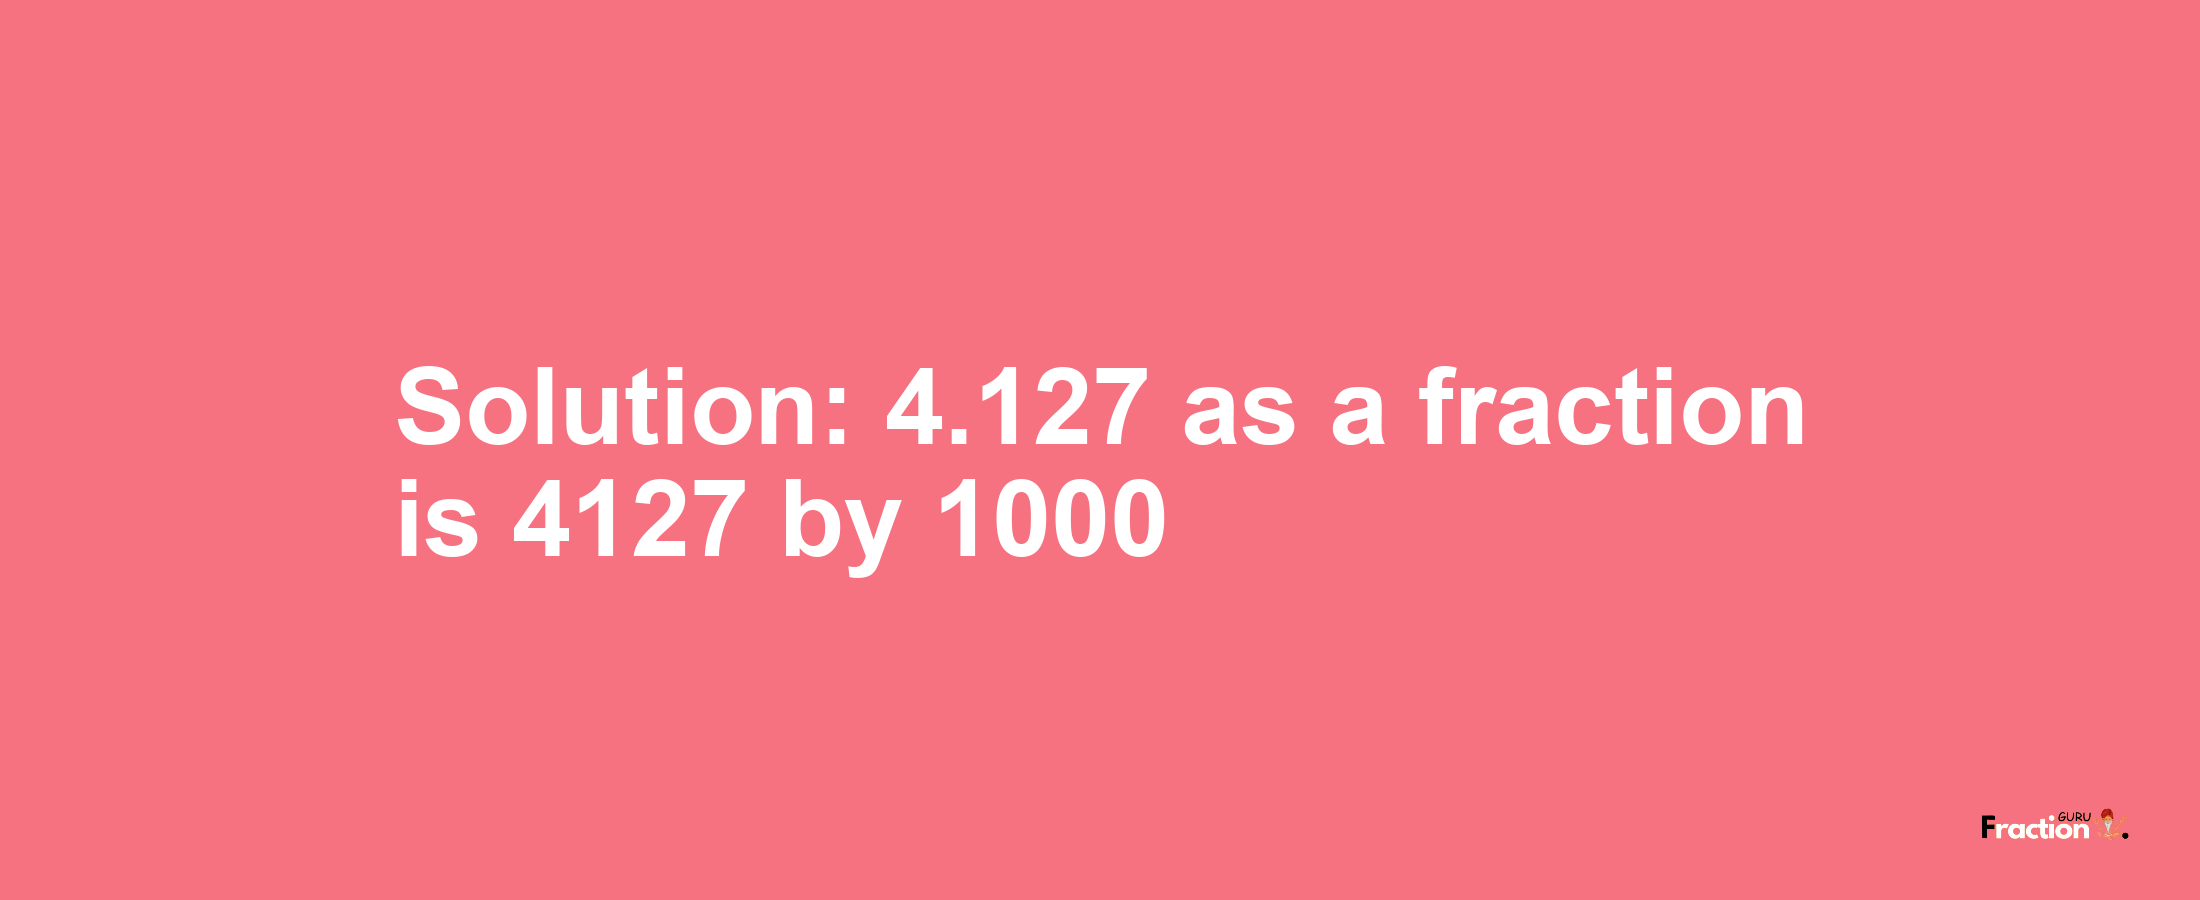 Solution:4.127 as a fraction is 4127/1000